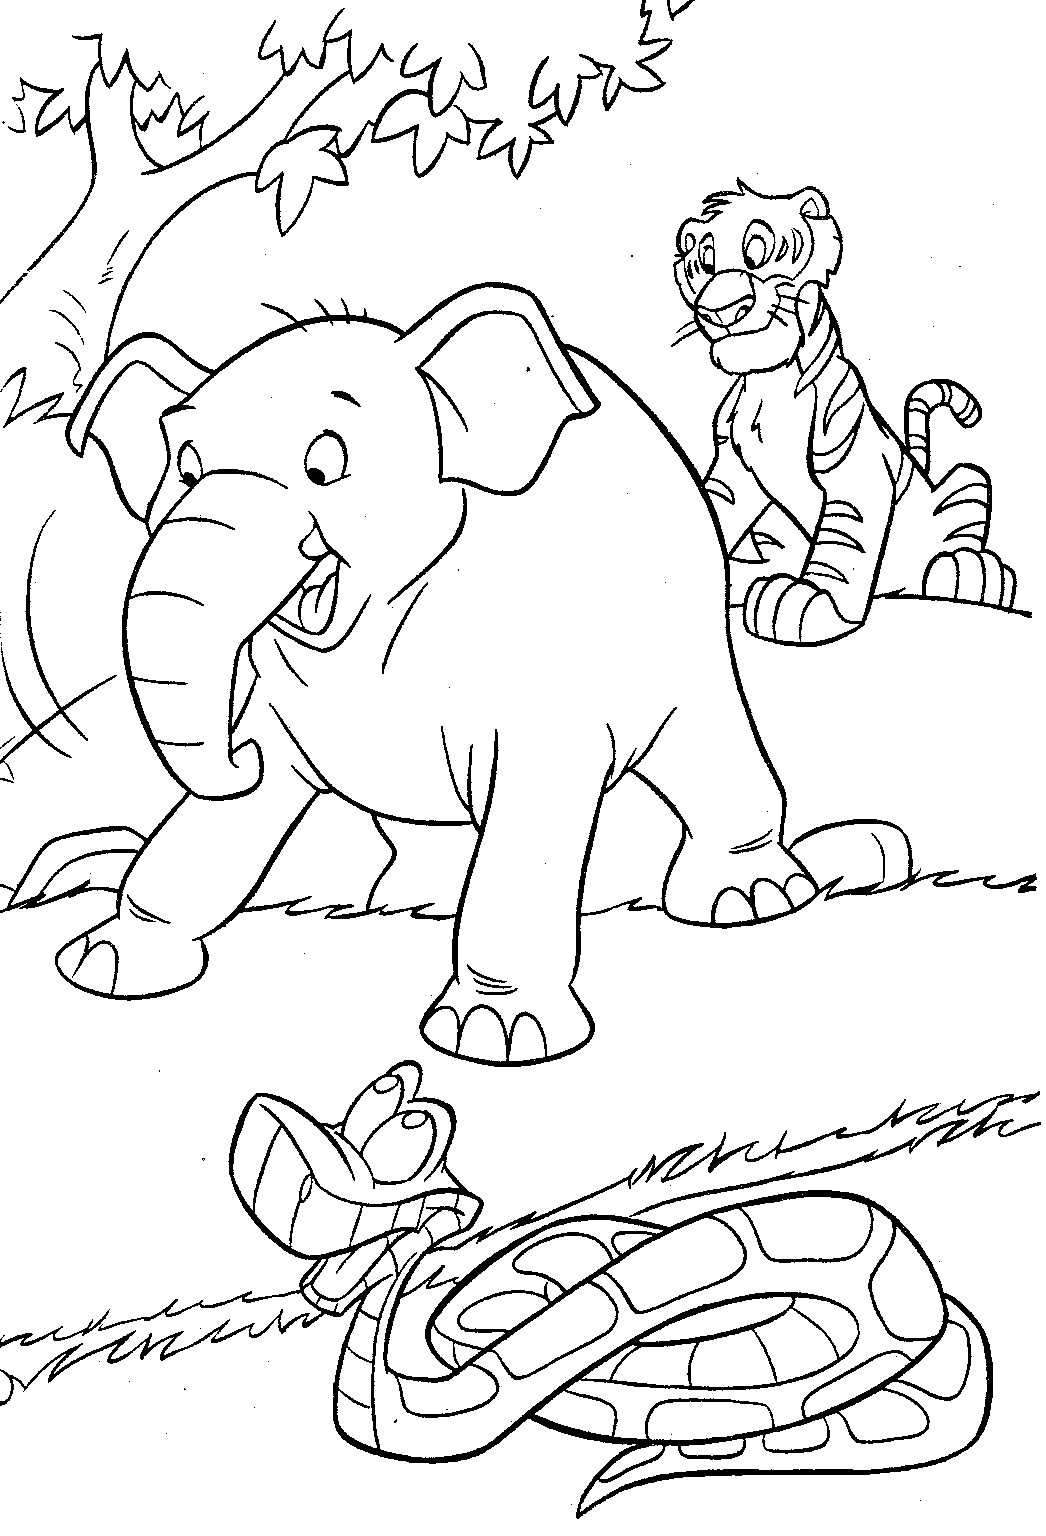 Cute Jungle Tree Coloring Pages